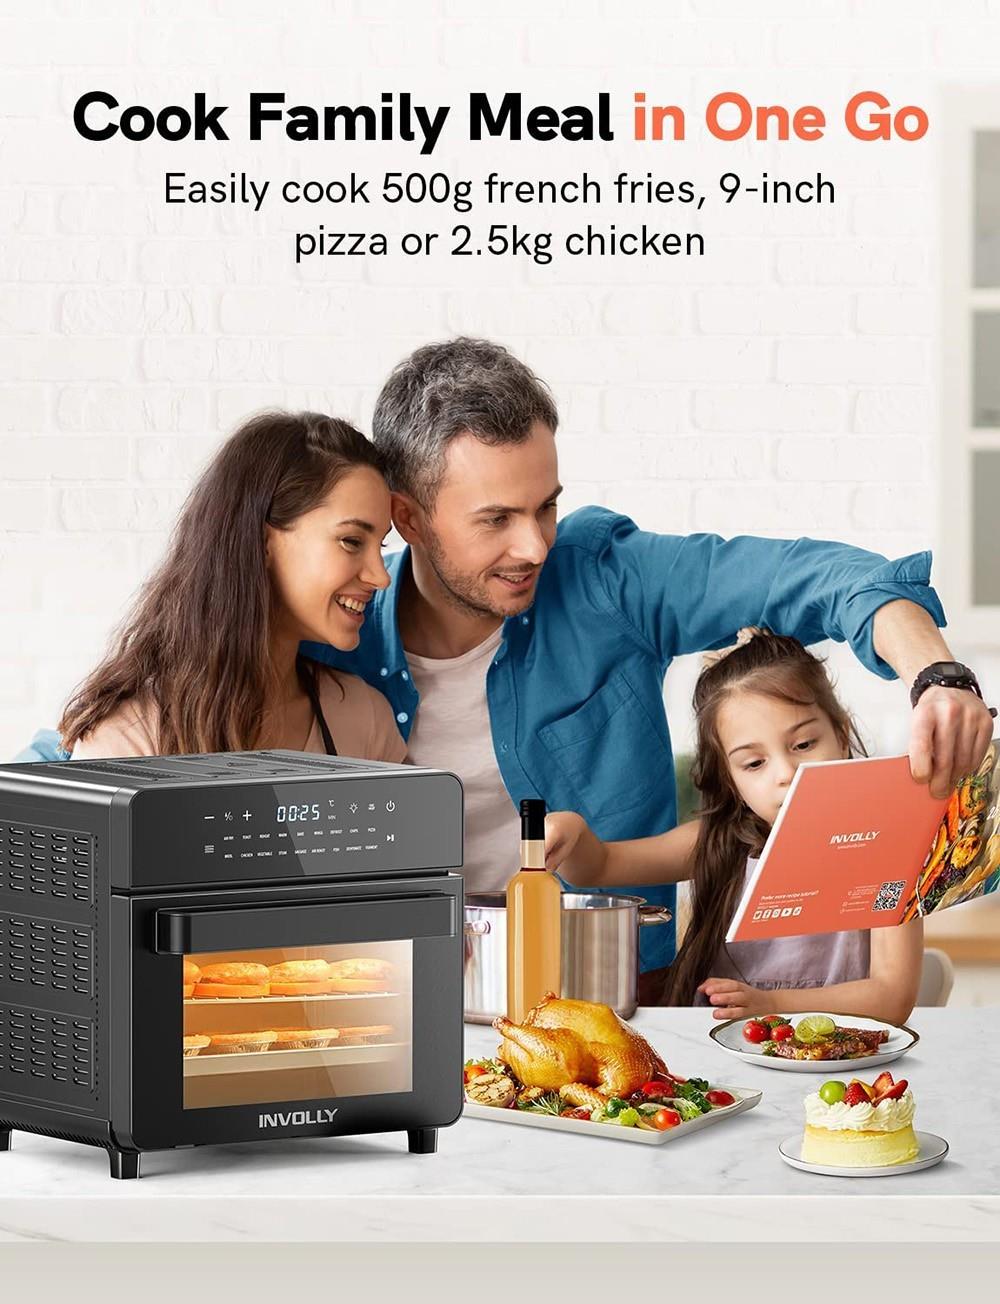 Involly AF-150ID 1600W Air Fryer Oven, 18 in 1 Countertop Mini Oven, 15L Capacity, 3-Layer, LED Touch Screen